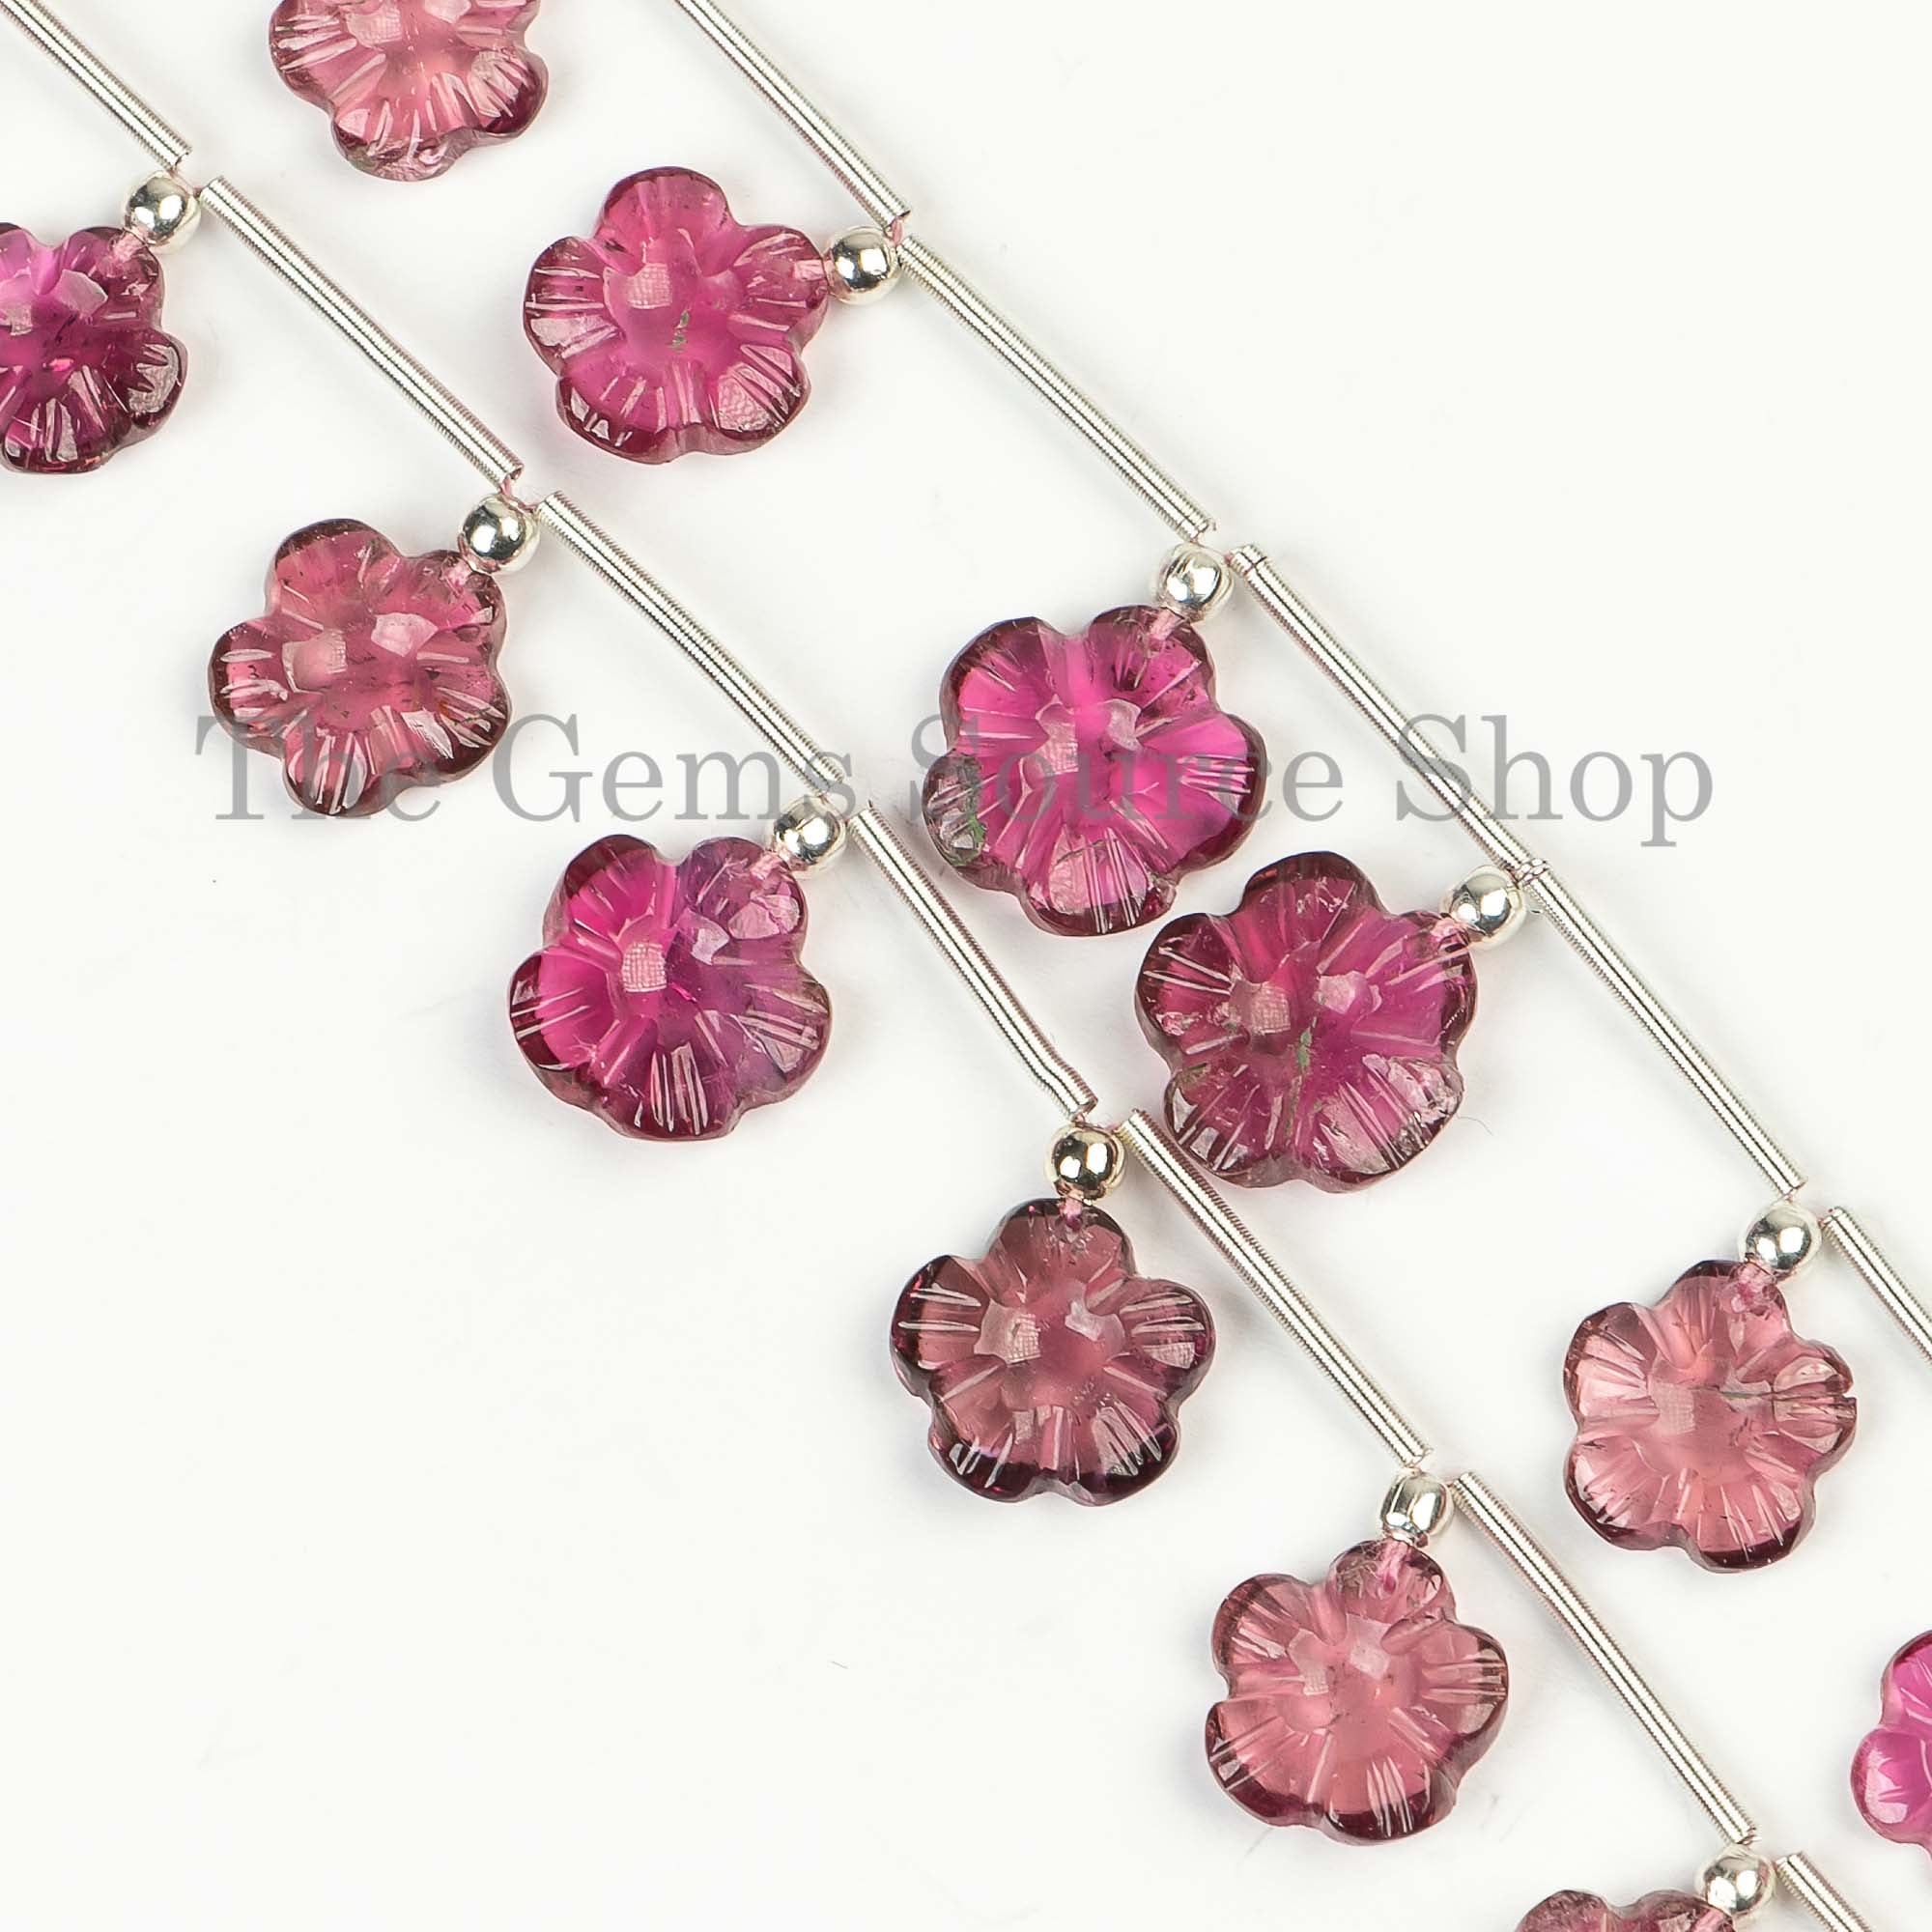 7-10mm Rubellite Tourmaline Flower Carving Gemstone Beads, 10pcs of Flower Carving Beads